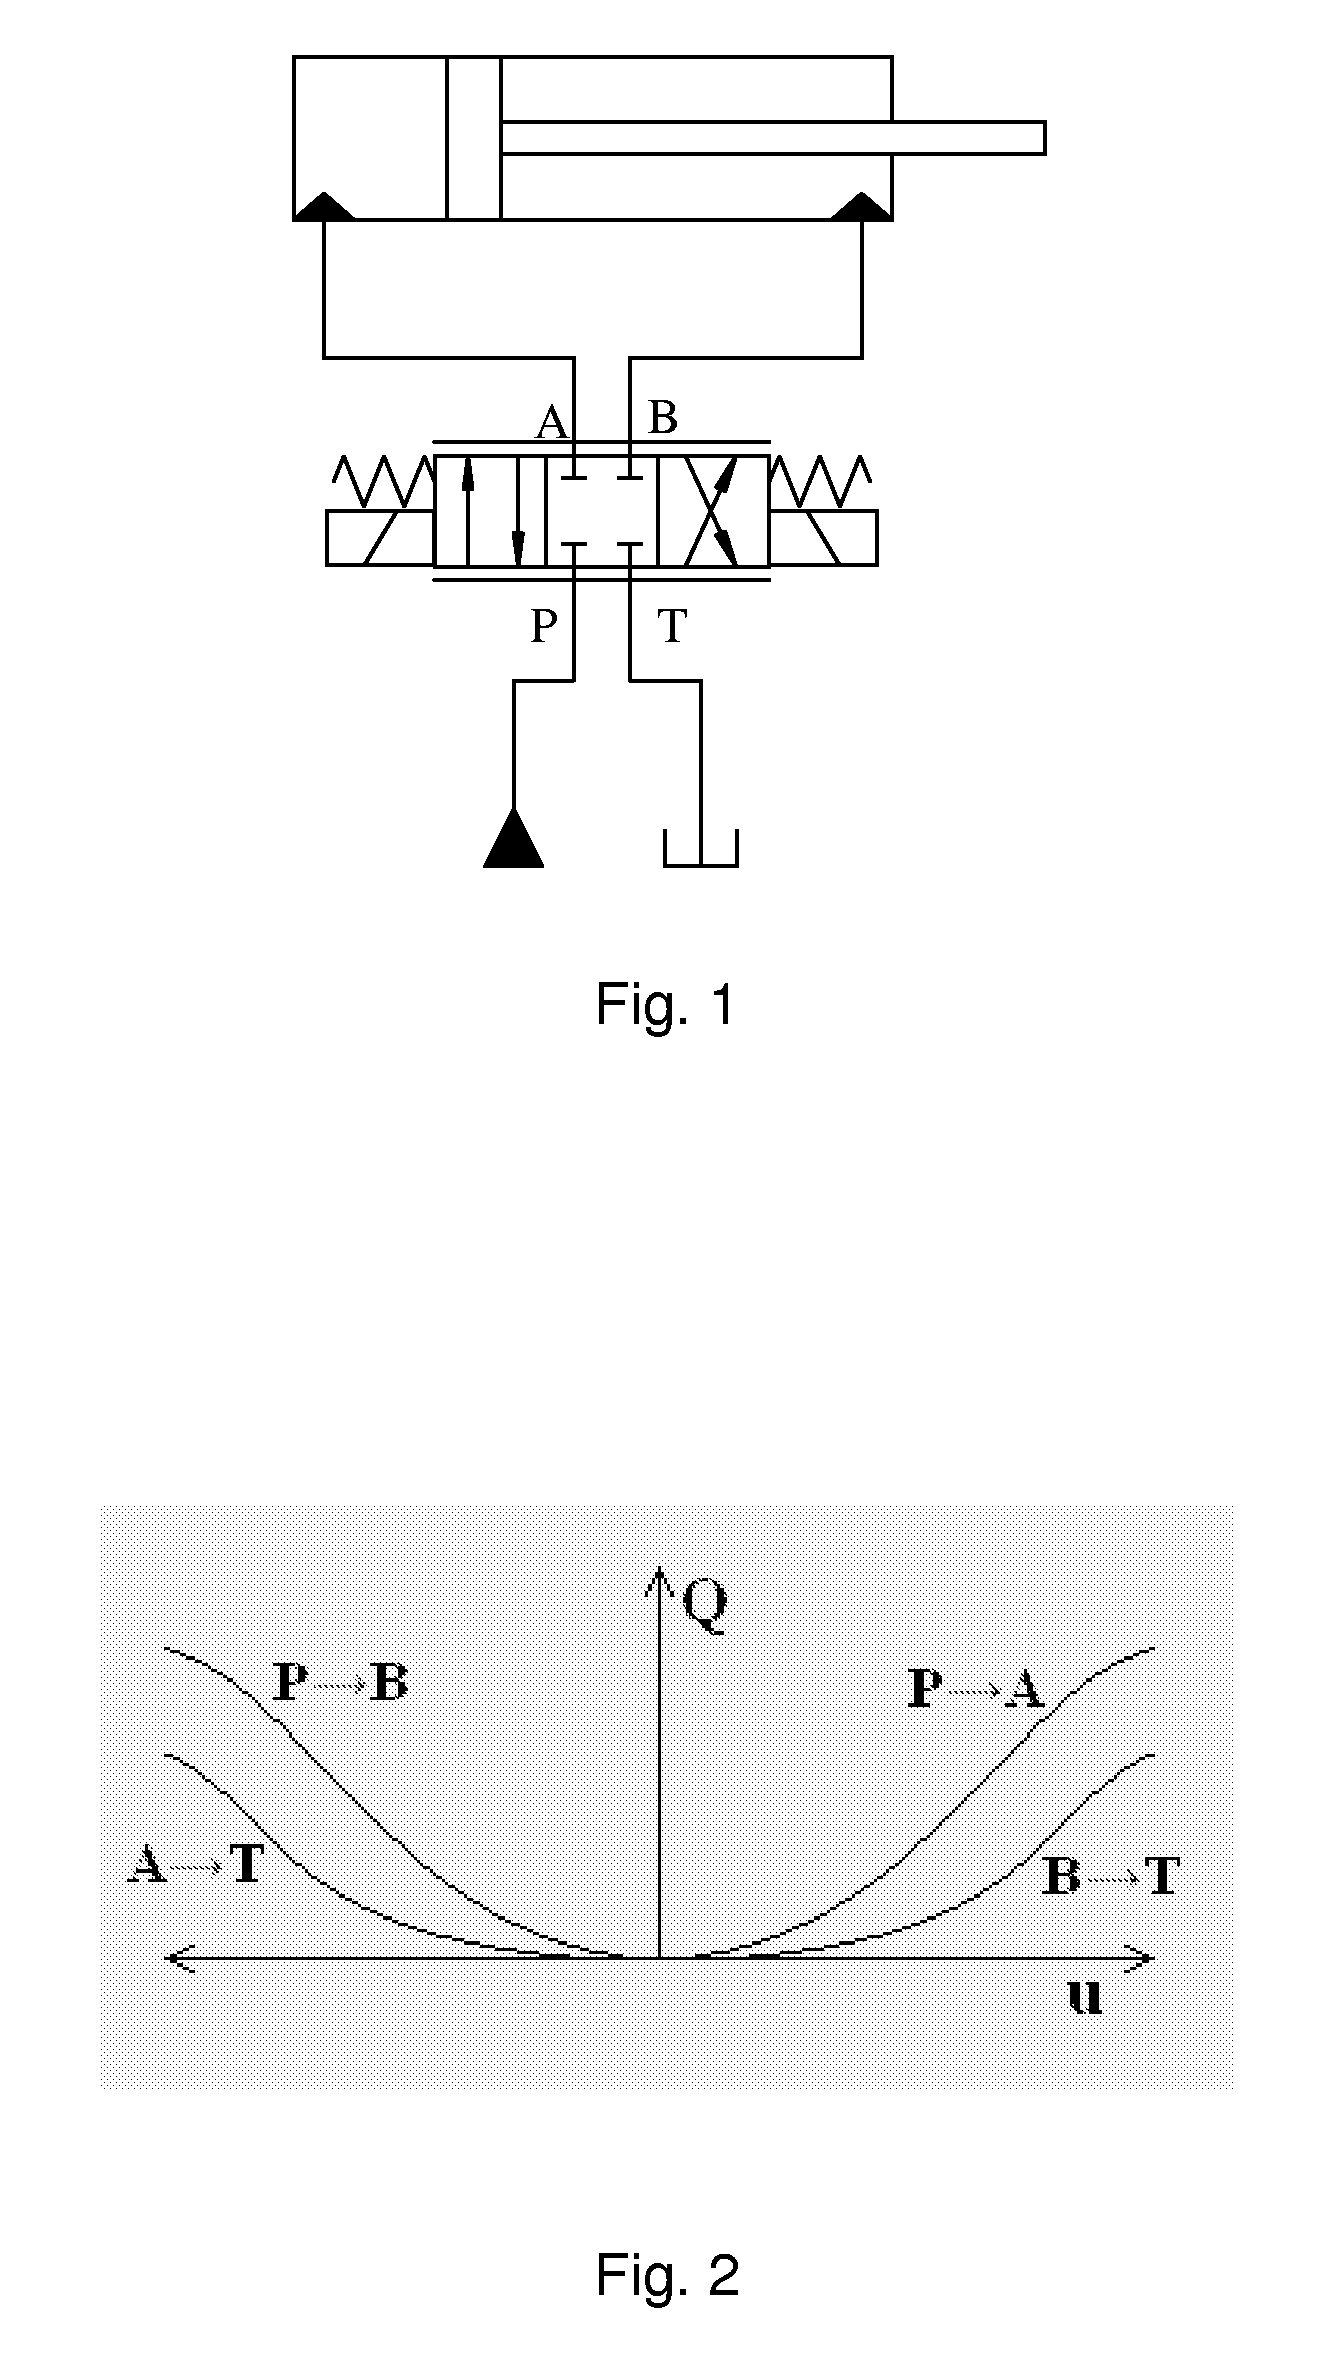 Detecting of faults in a valve system and a fault tolerant control